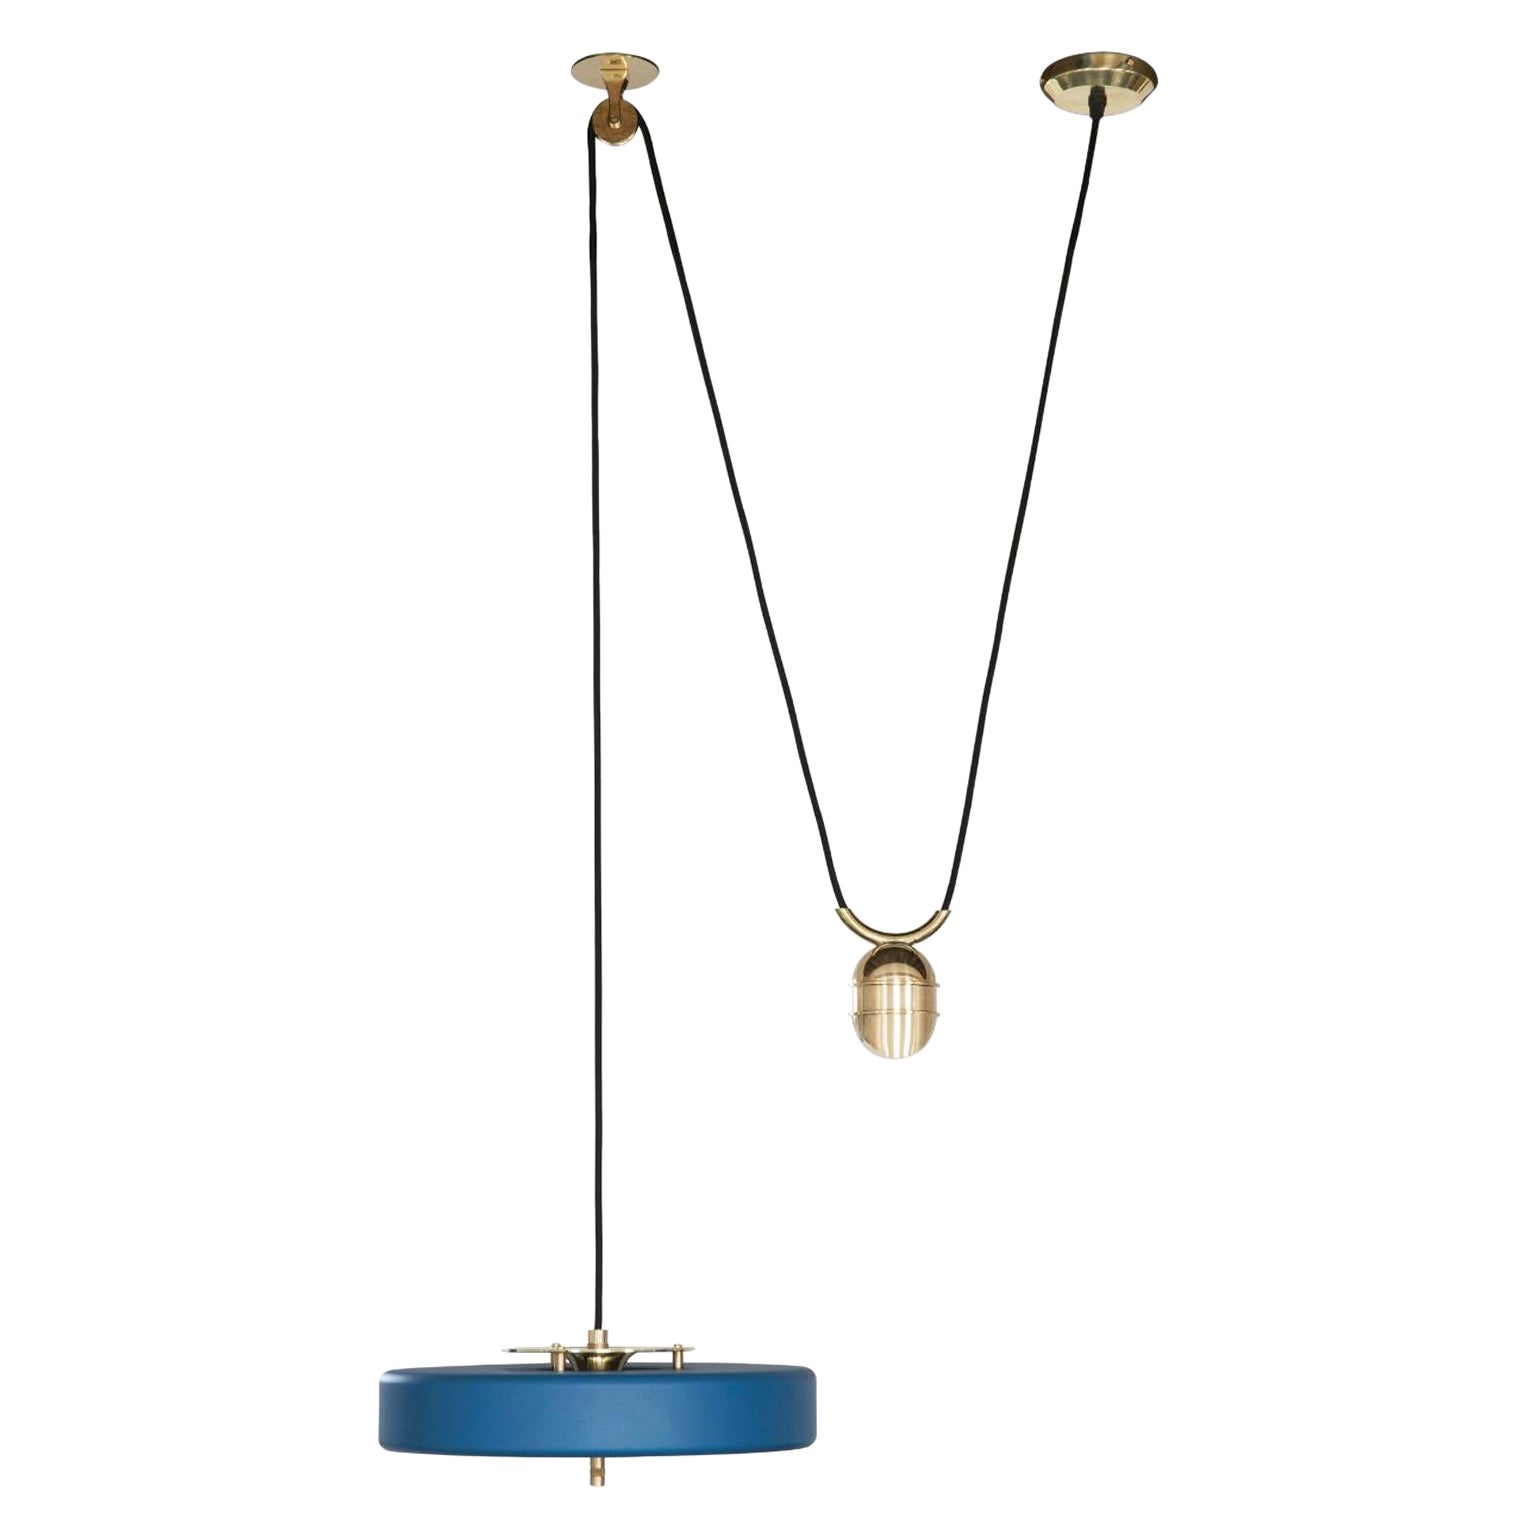 Revolve Rise and Fall Pendant Light, Brushed Brass, Blue by Bert Frank